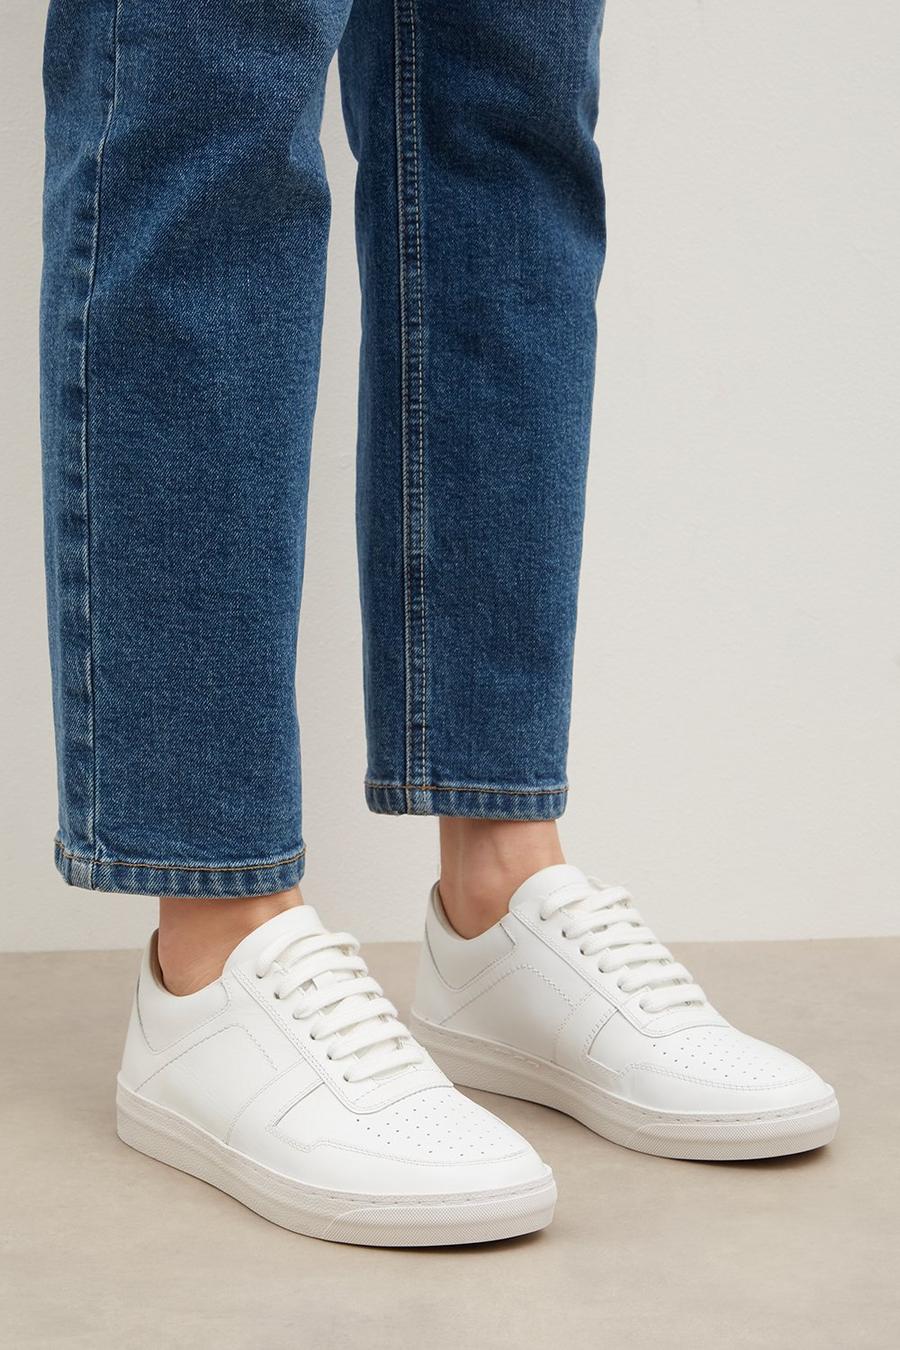 Good For The Sole: Indie Comfort Leather Lace Up Trainer